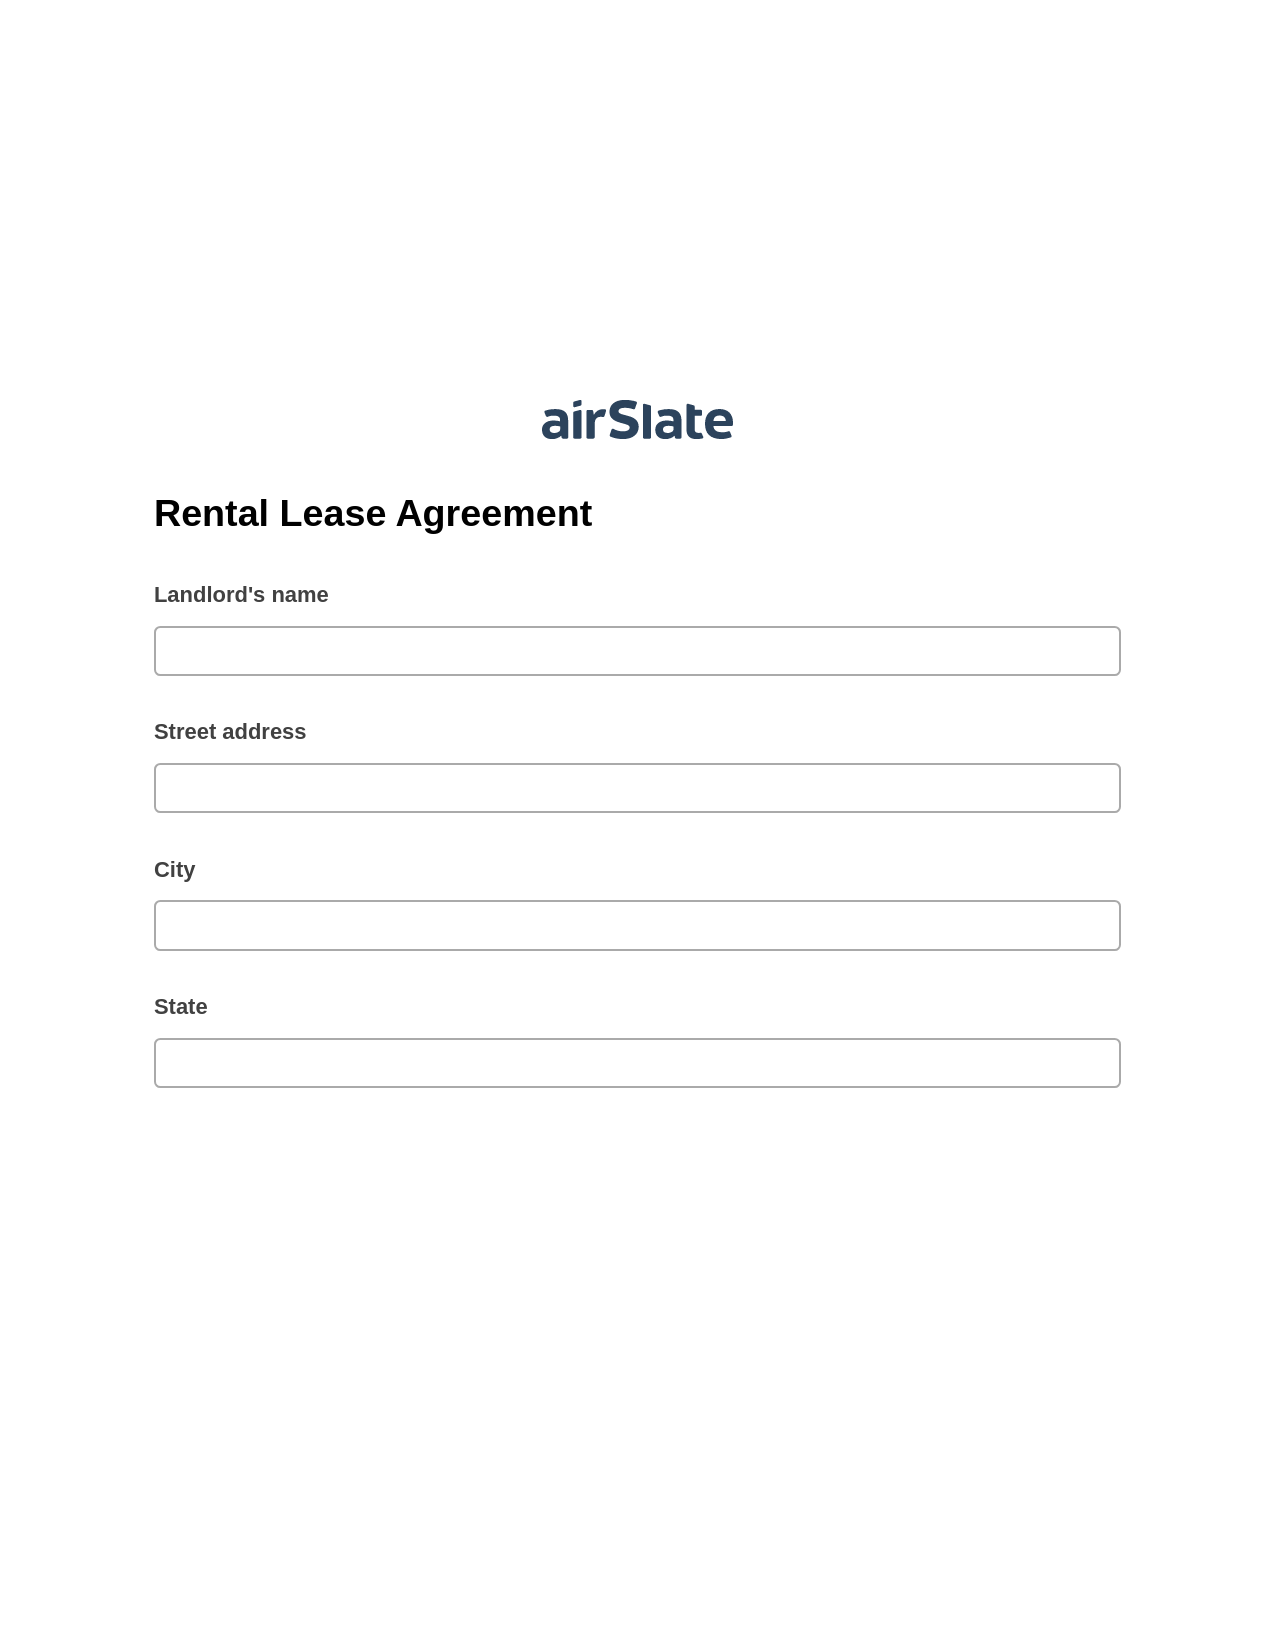 Rental Lease Agreement Pre-fill from Google Sheets Bot, Remove Tags From Slate Bot, Export to Formstack Documents Bot